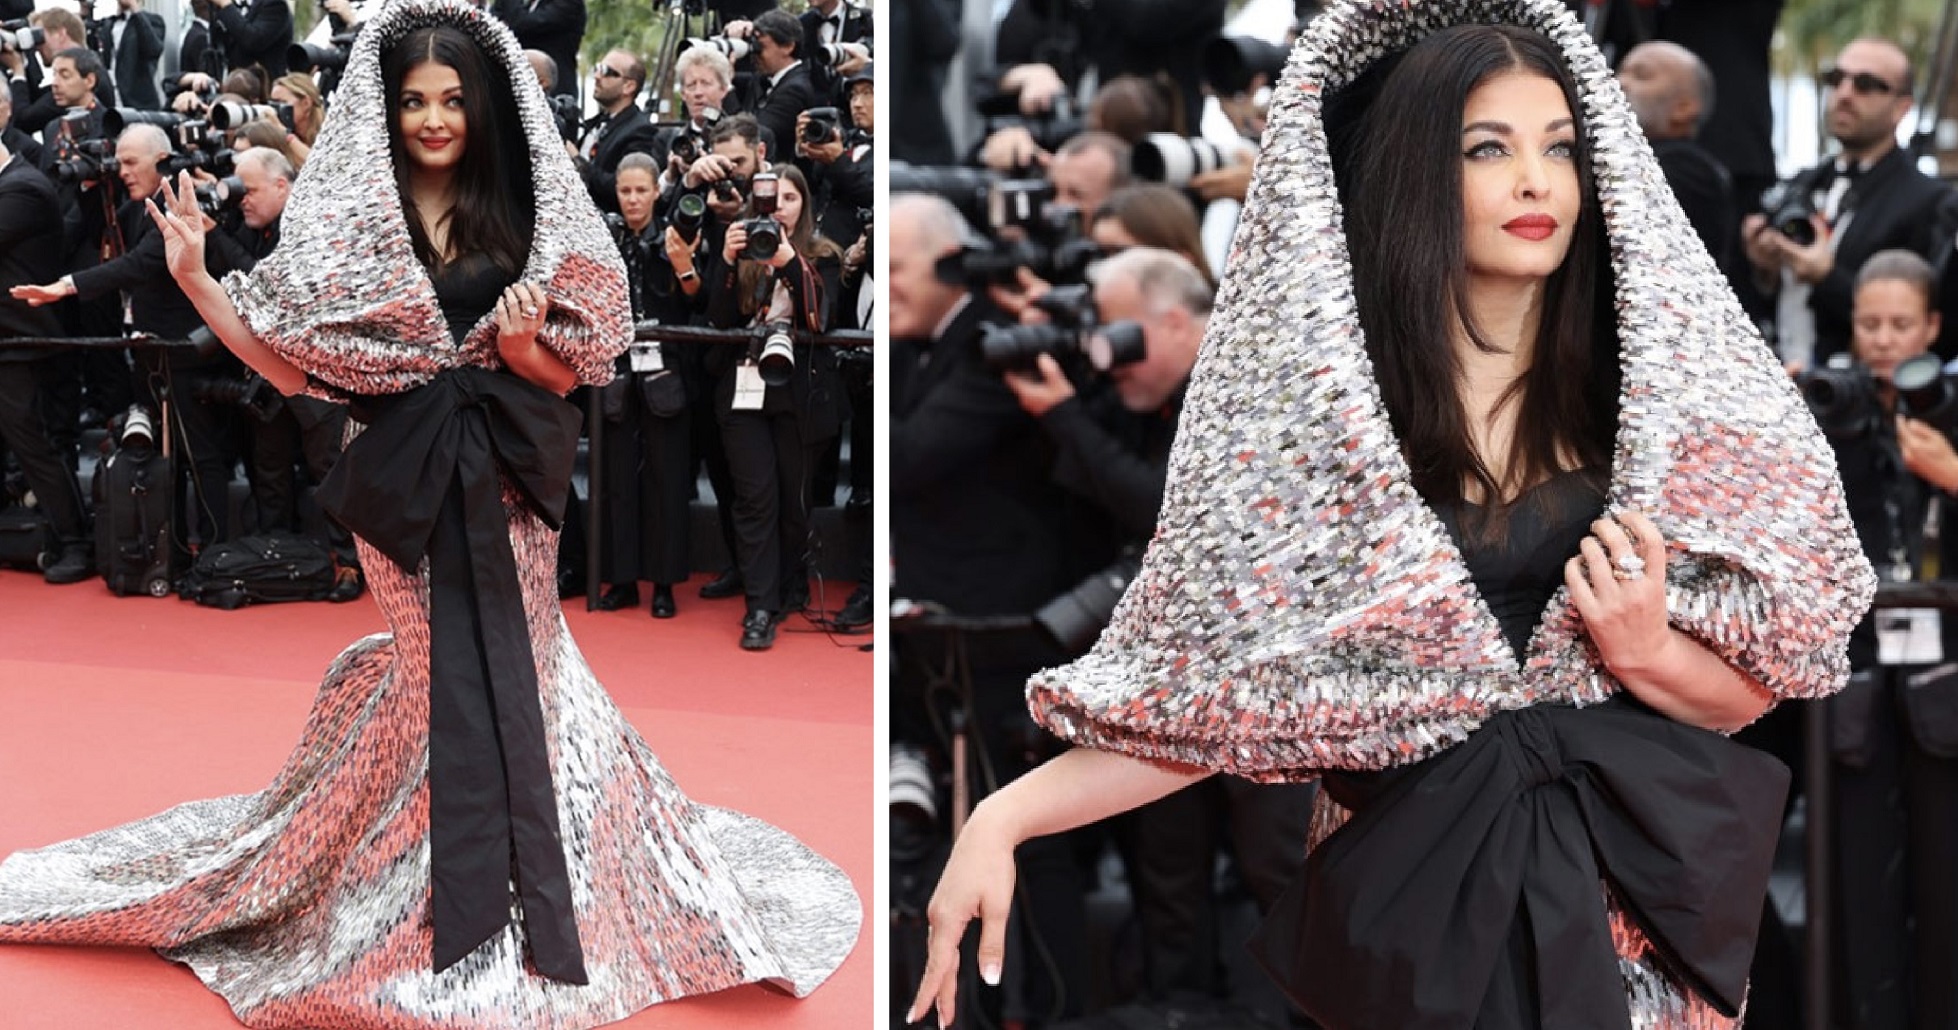 Queen of Cannes: Aishwarya Rai Arrives At 2023 Cannes Wearing A Larger-Than-Life Silver-Black Gown